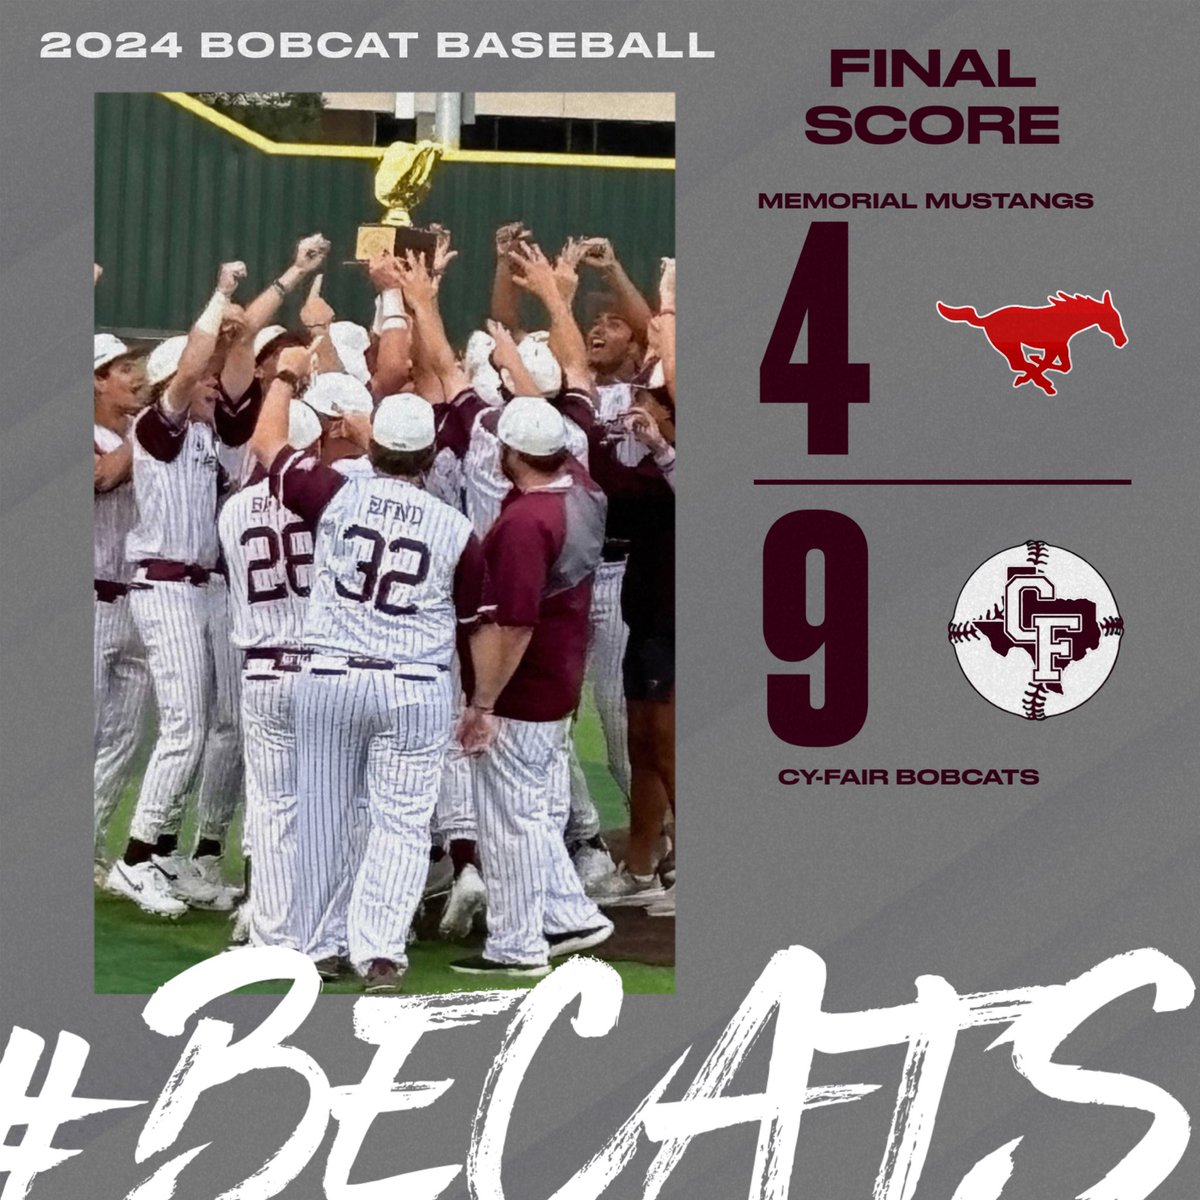 💥DISTRICT CHAMPS💥 Varsity beats Memorial 9-4 & claims the 2024 17-6A District Championship! @DylanRostron1 got the win on the mound & @isaac_robles21 hit his 3rd 💣 of the year! #beCATS | #BFND | 🐾⚾️